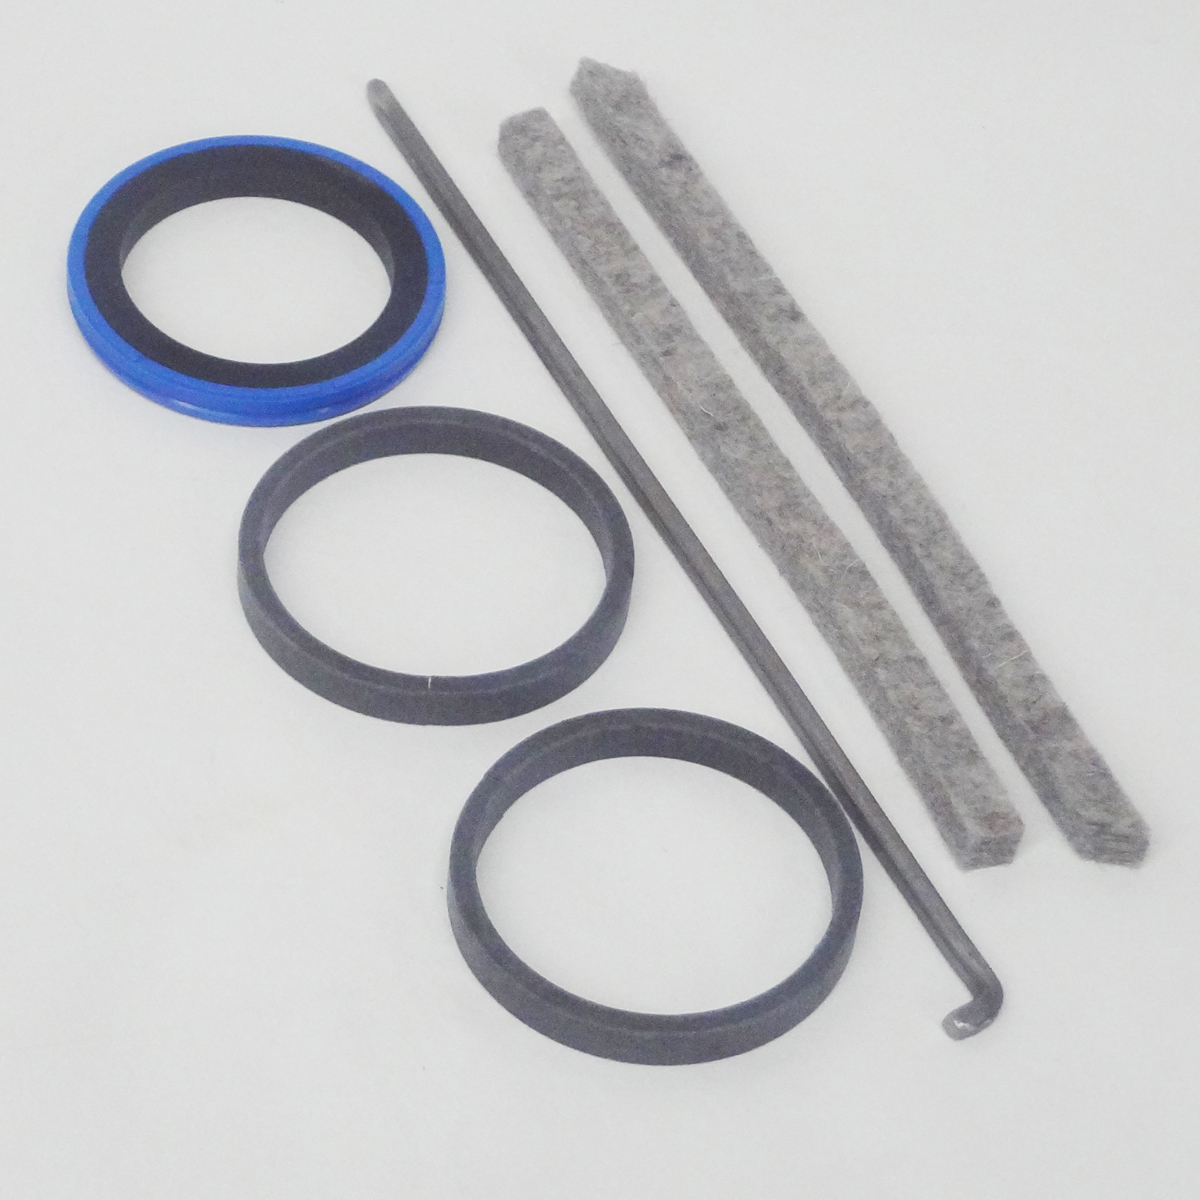 Quality Replacement Parts for Repairs RA-106 Cylinder 10 Ton Seal Replacement Kit 